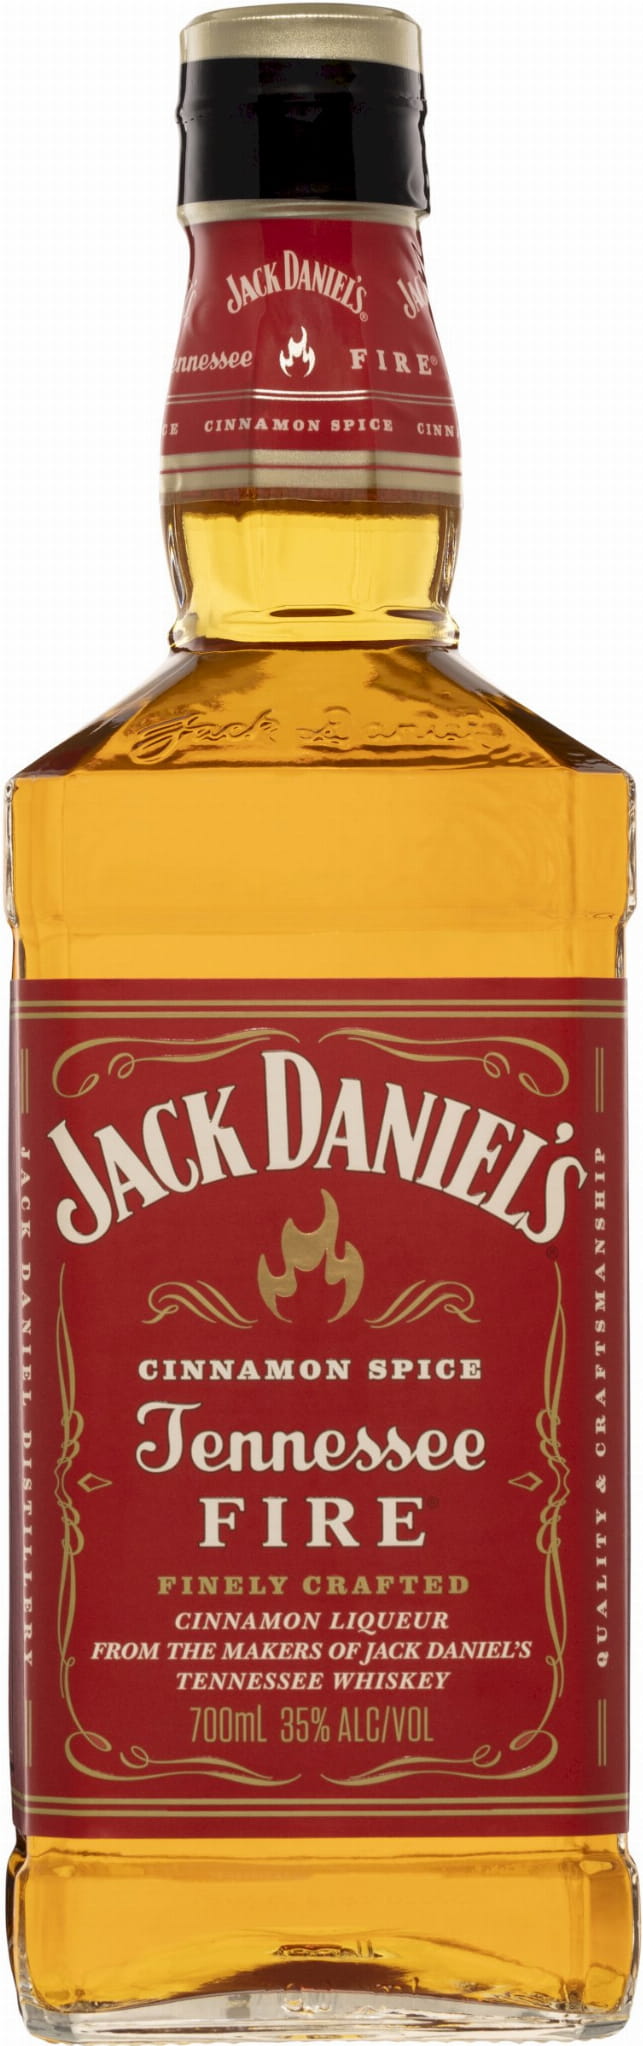 Maker's Mark vs Jack Daniels - What Are The Differences?